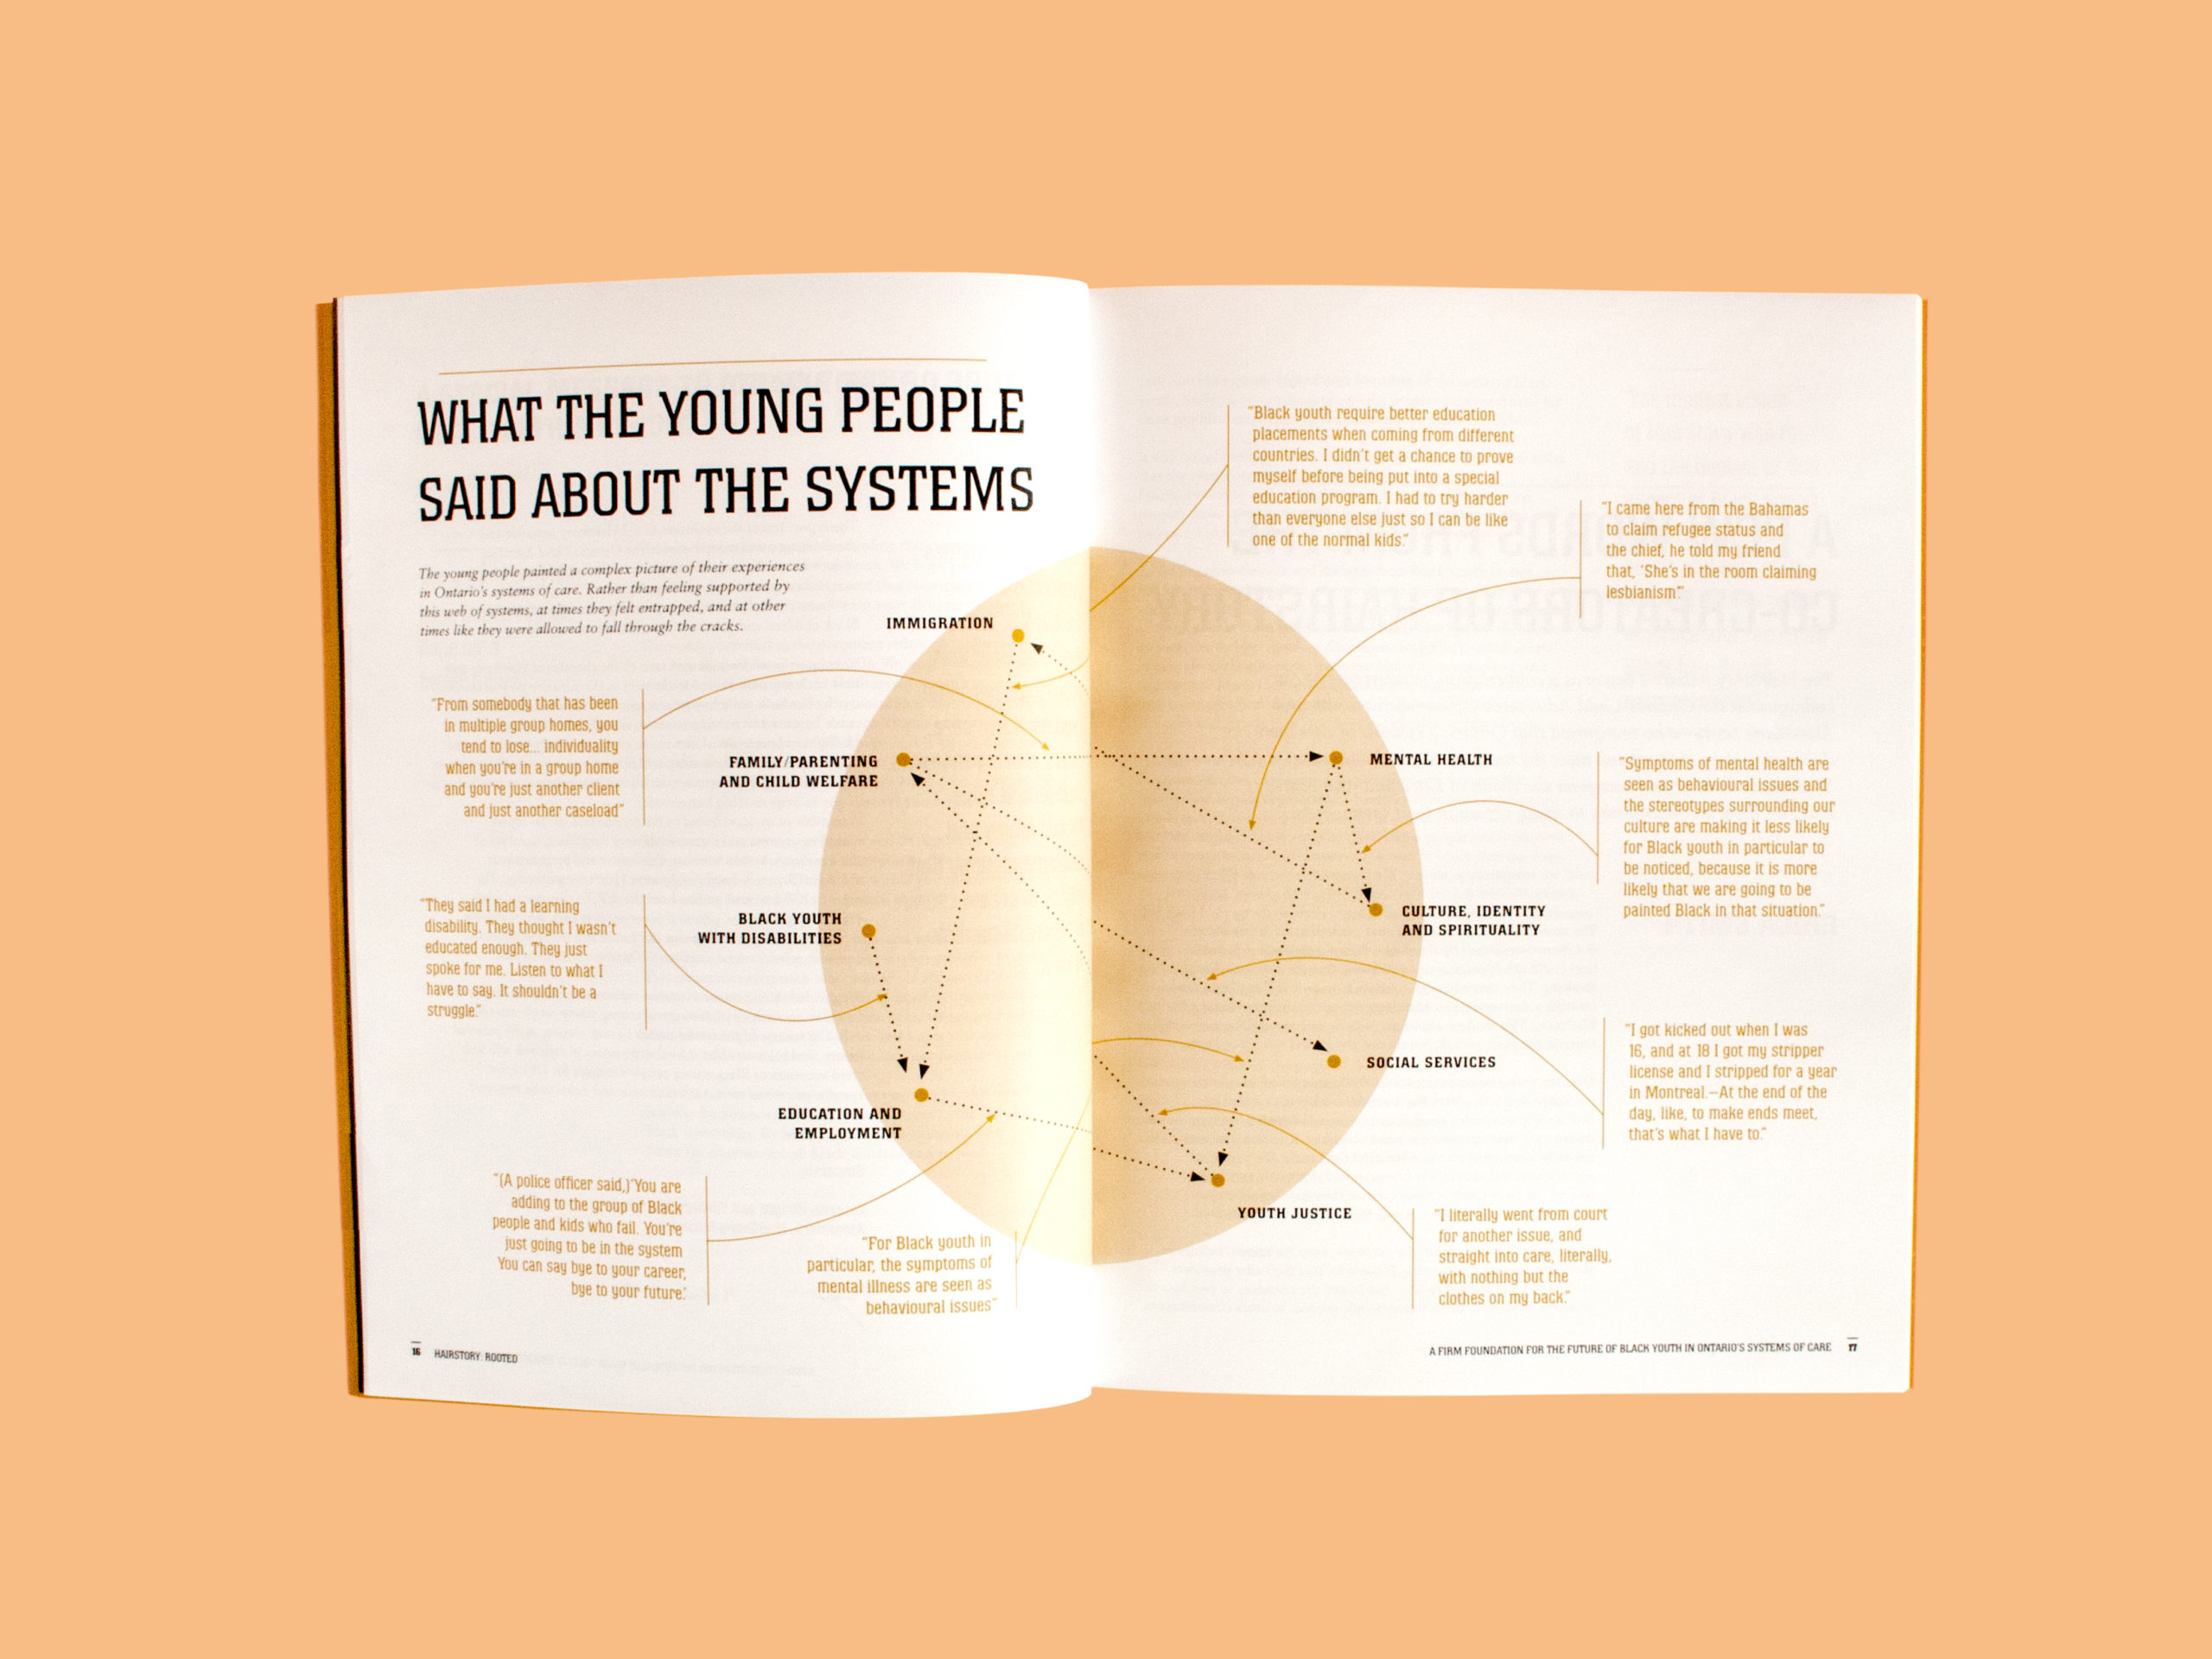 Photo of a spread from HairStory—Rooted. In the center is a large gold circle representing the young people’s experiences in care. Inside the circle are dots representing different systems of care such as immigration, education, mental health, and youth justice. Surrounding the circle are quotes from Black youth in care, and they are connected with lines to the systems they relate to.